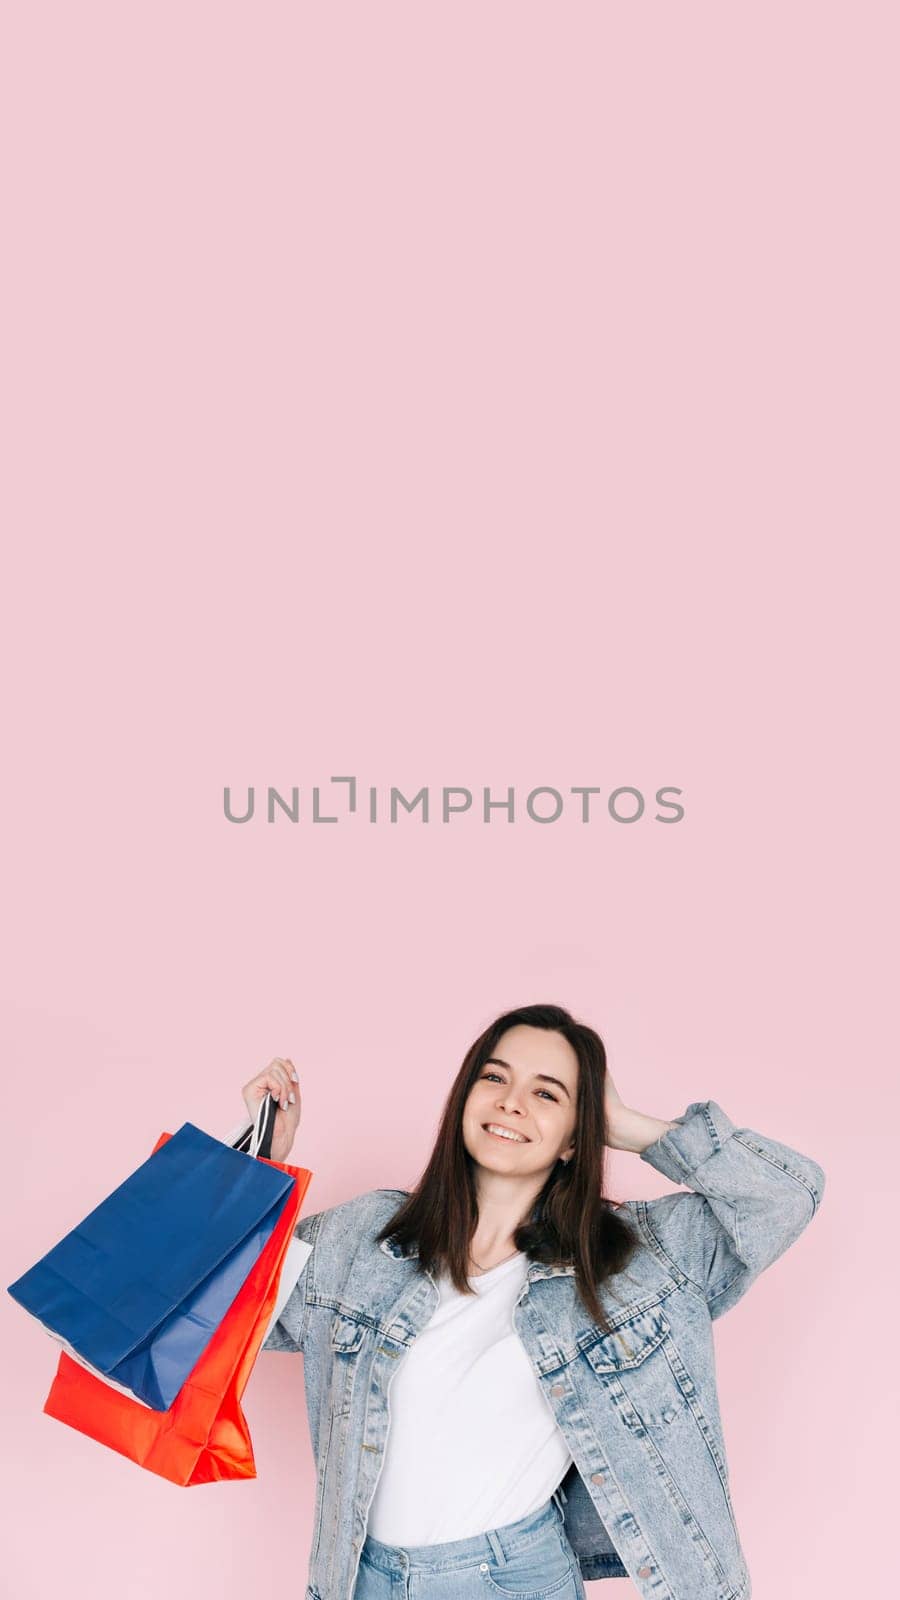 Joyful Shopper: Young Woman in Denim Shirt Celebrating, Arm Raised in Excitement, Against Pink Background, Delighted by Online Shopping or Amazing Find. Vertical photography